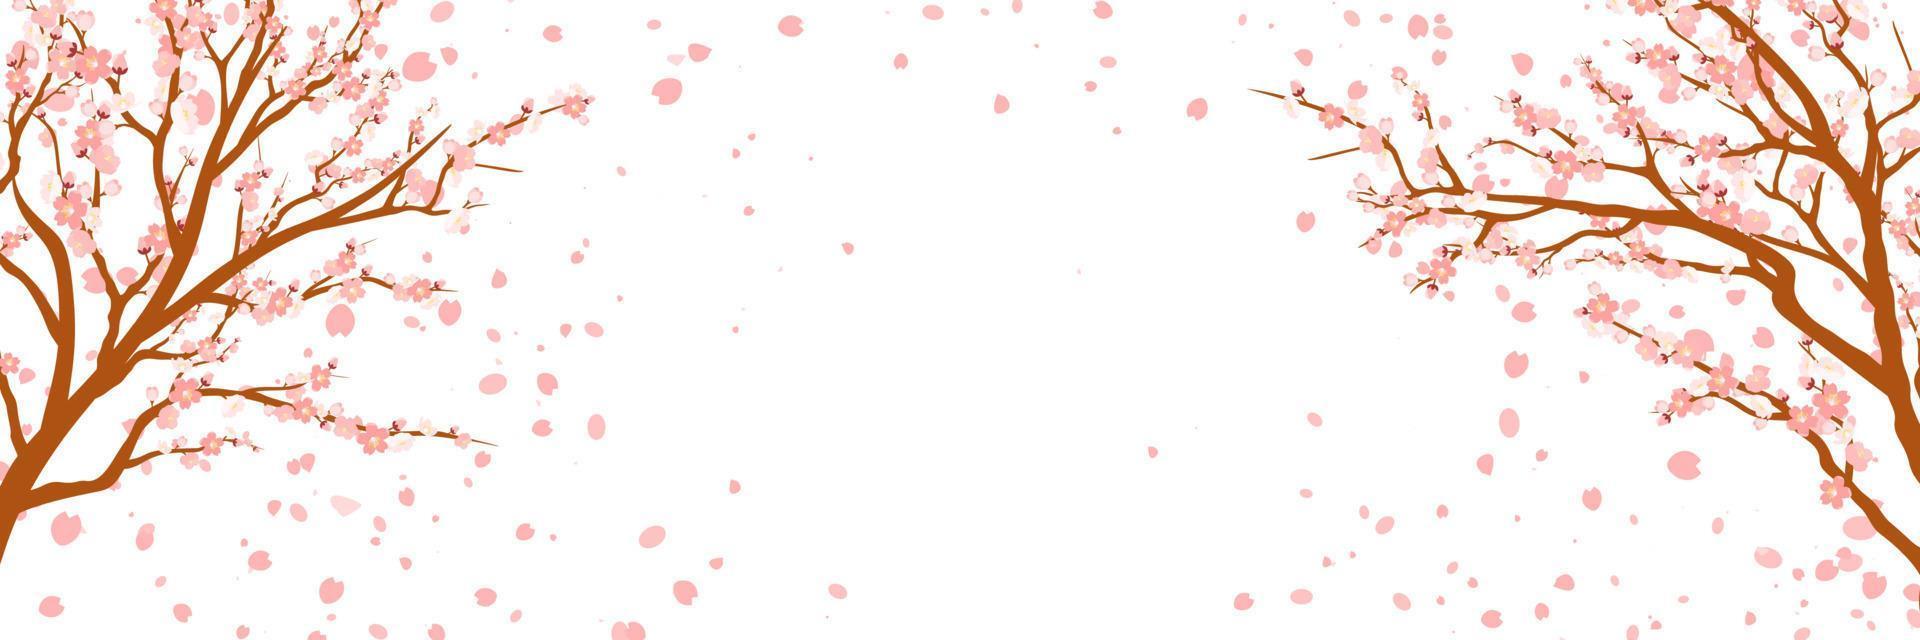 Branches with pink flowers and cherry buds. Sakura. Petals flying in the wind. isolated on white background. vector illustration.